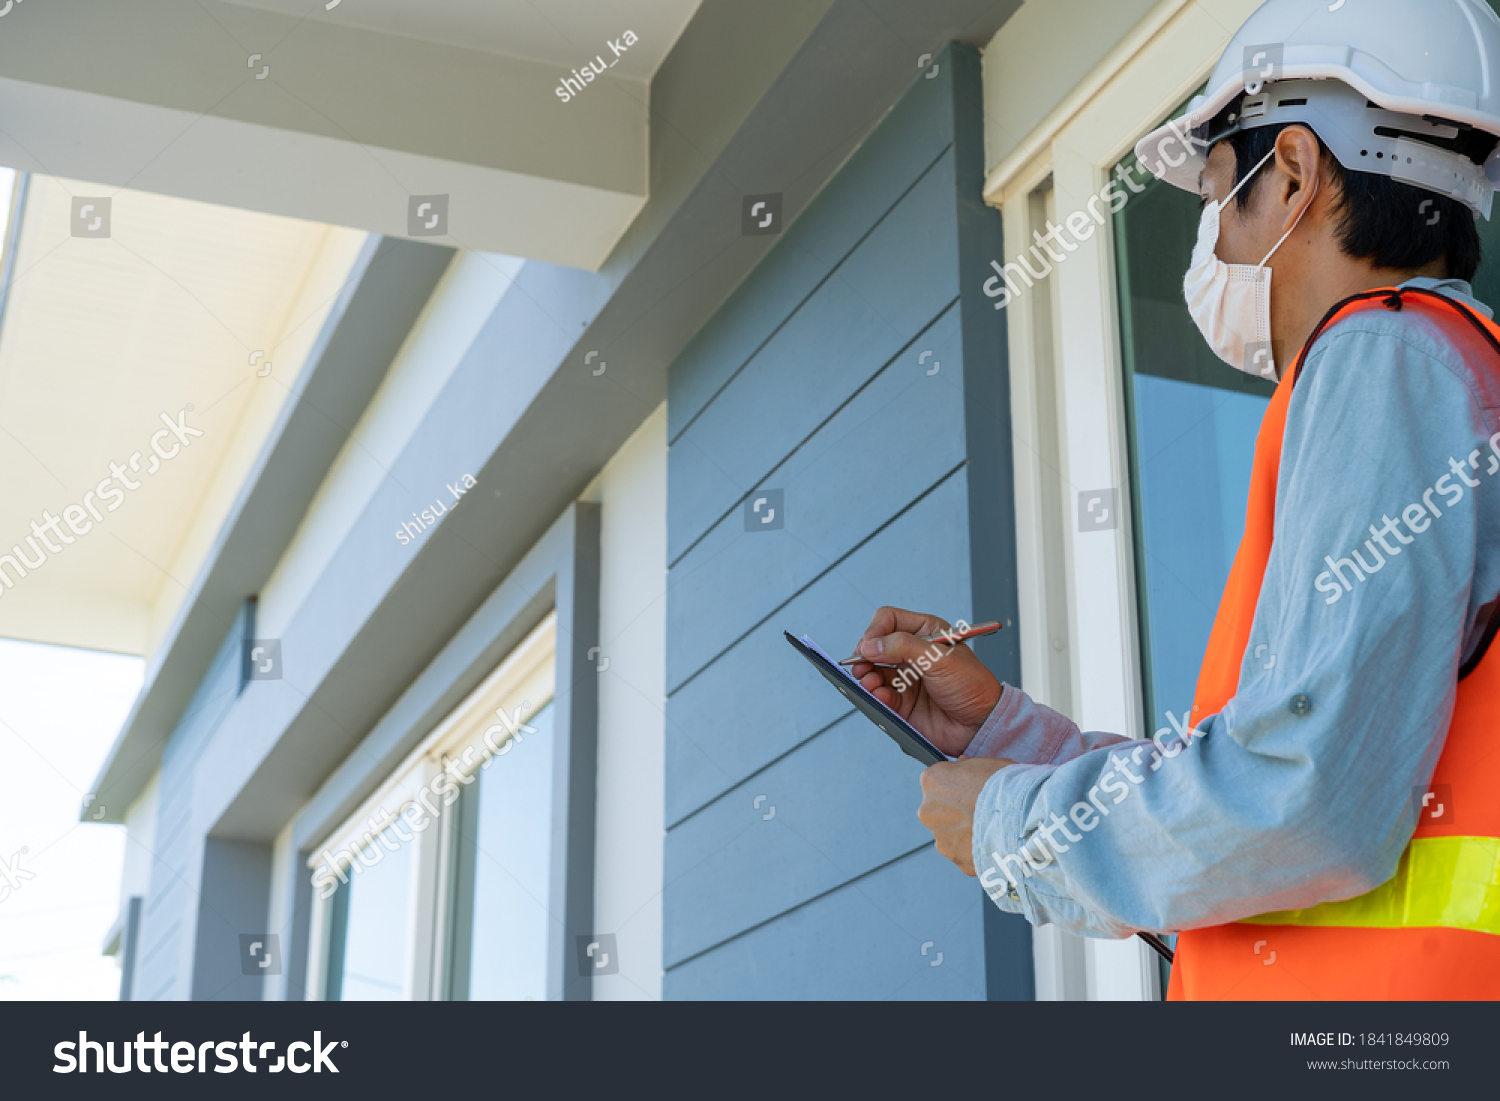 Engineers or inspectors in orange reflective vests are taking notes and checking with clipboards at the building's construction site, contractor inspections and engineering concepts. #1841849809